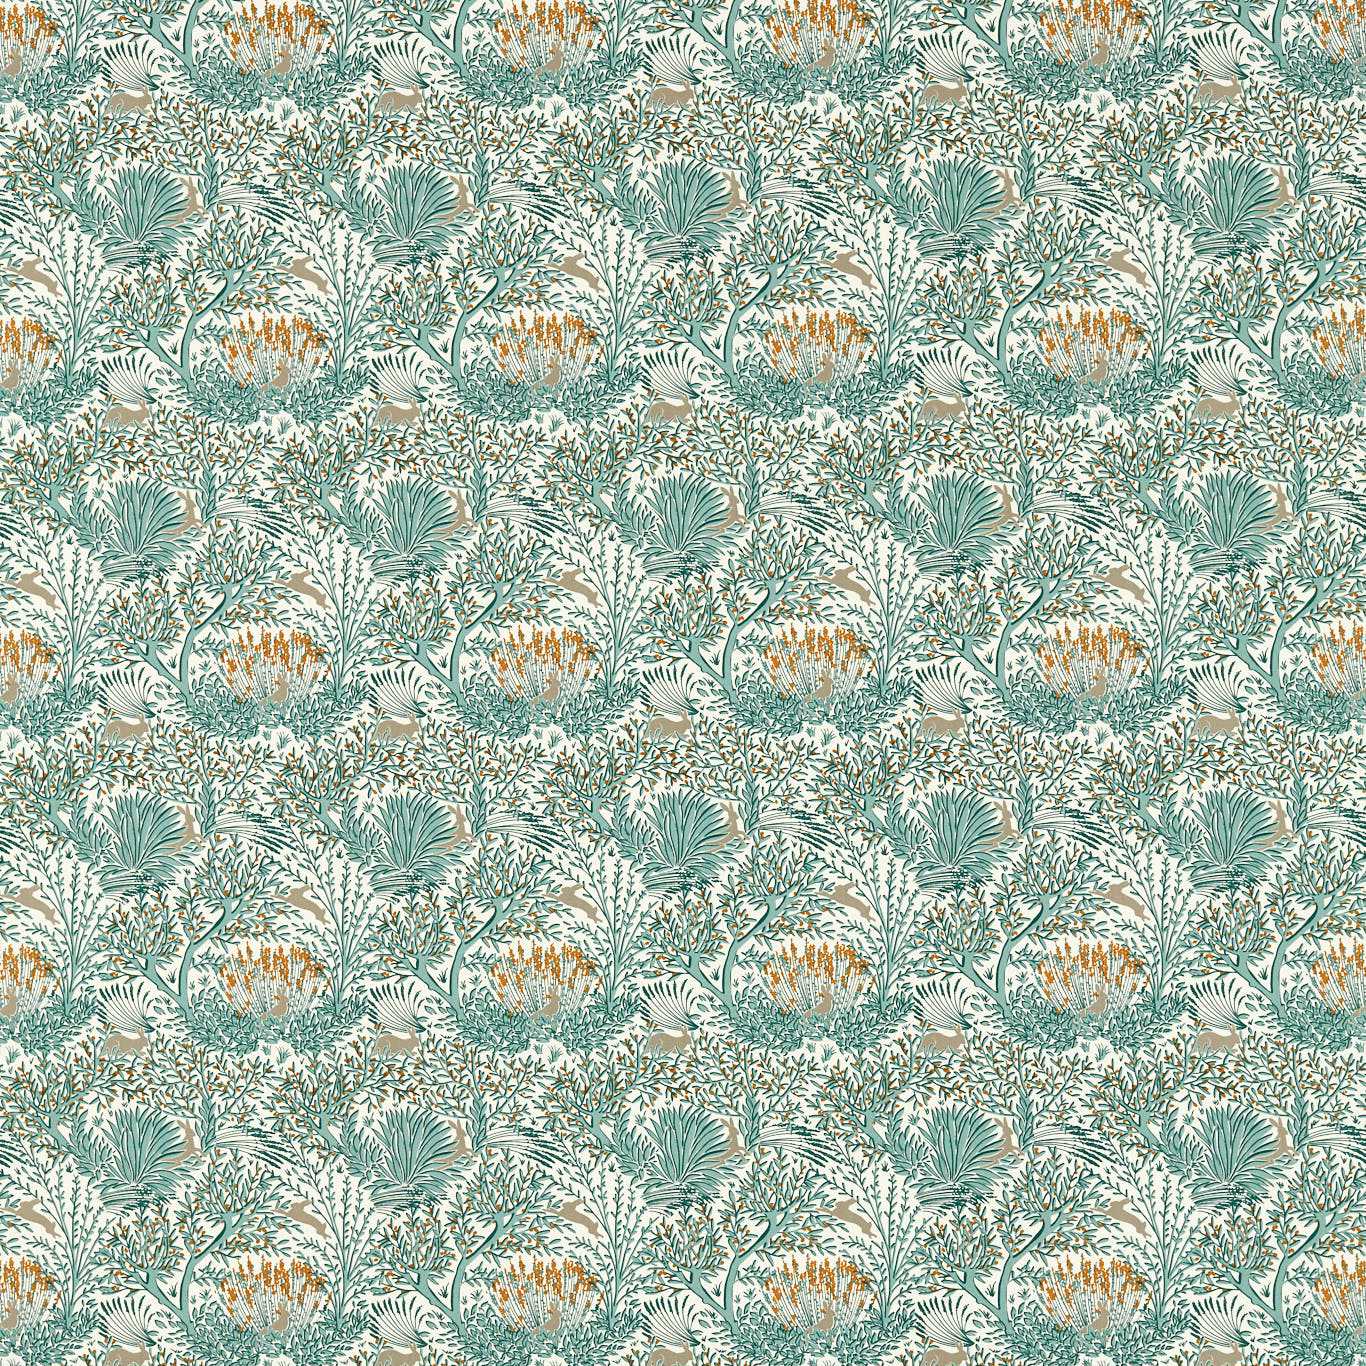 Wilderwood Teal/Spice Fabric by CNC